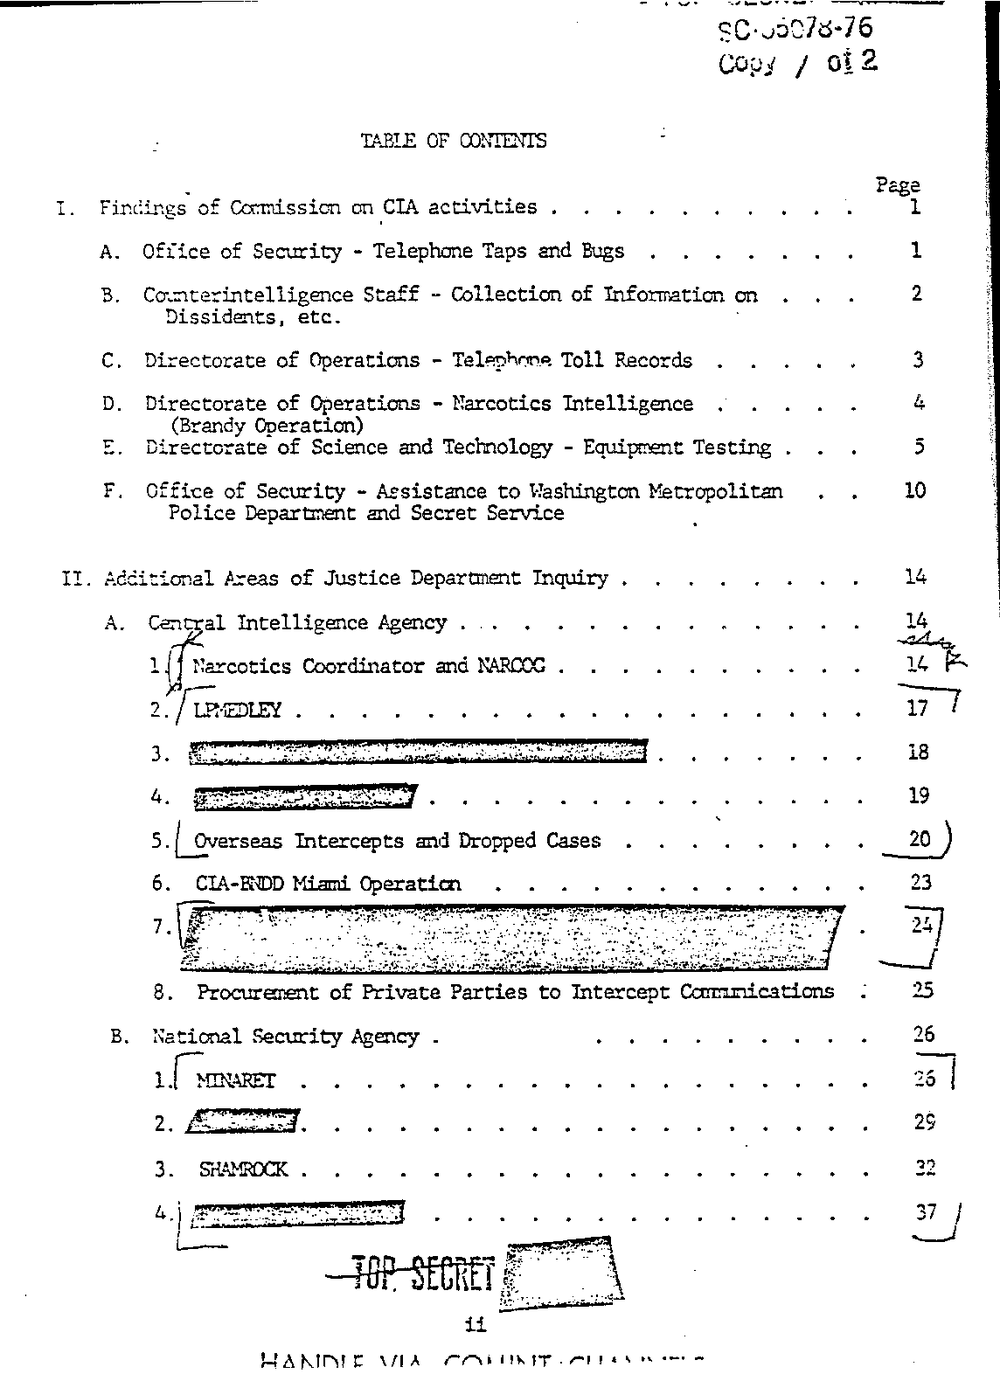 Page 3 from Report on Inquiry Into CIA Related Electronic Surveillance Activities